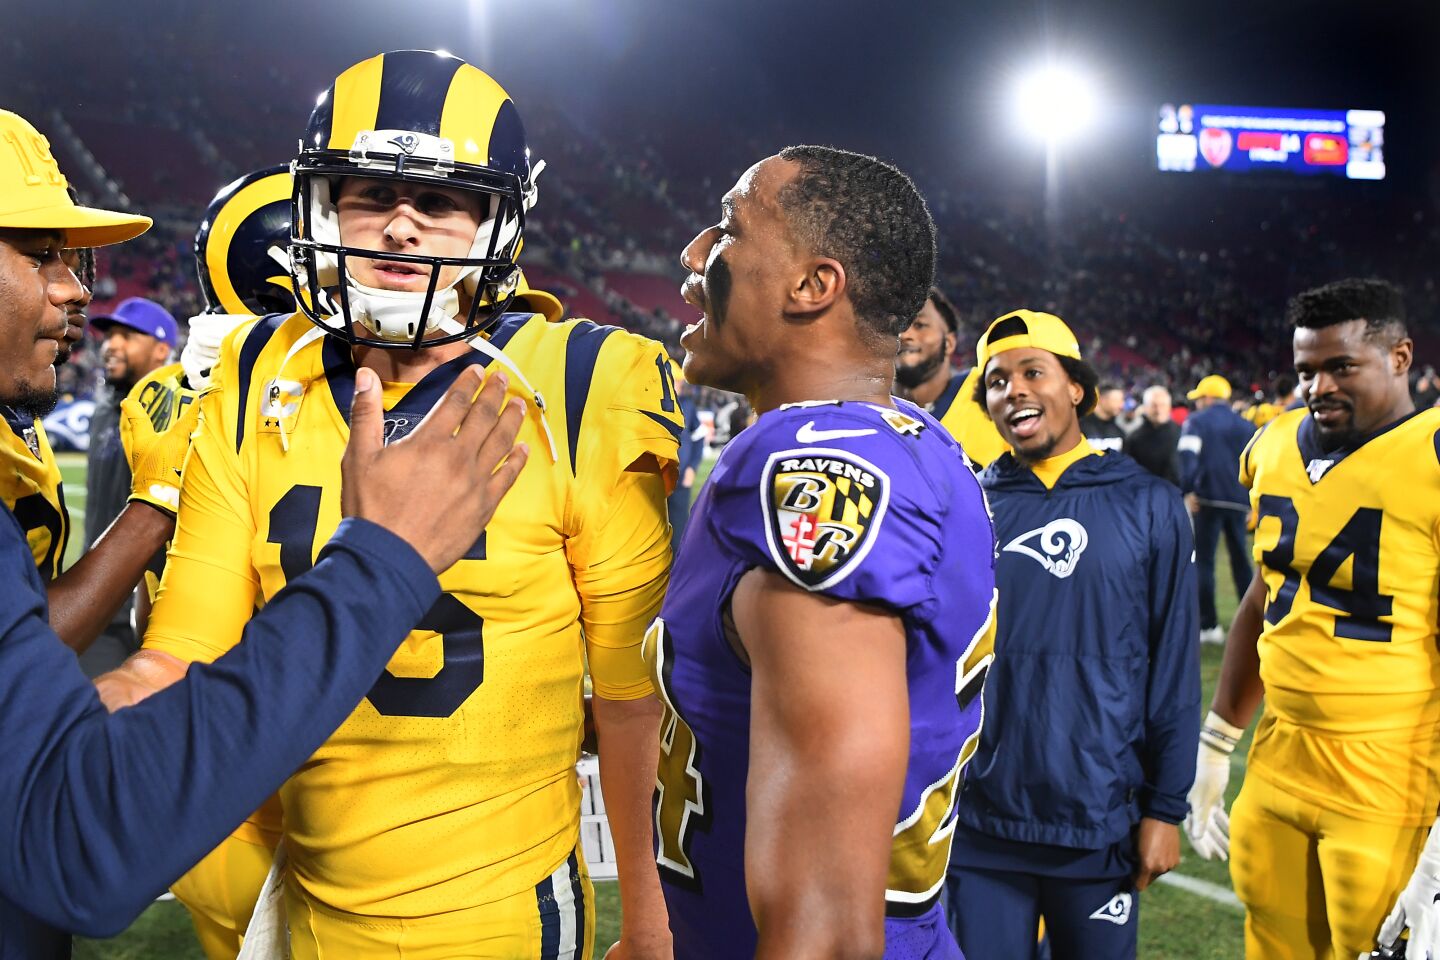 Ravens cornerback Marcus Peters talks to Rams quarterback Jared Goff as they leave the field after a game Nov. 25 at the Coliseum.